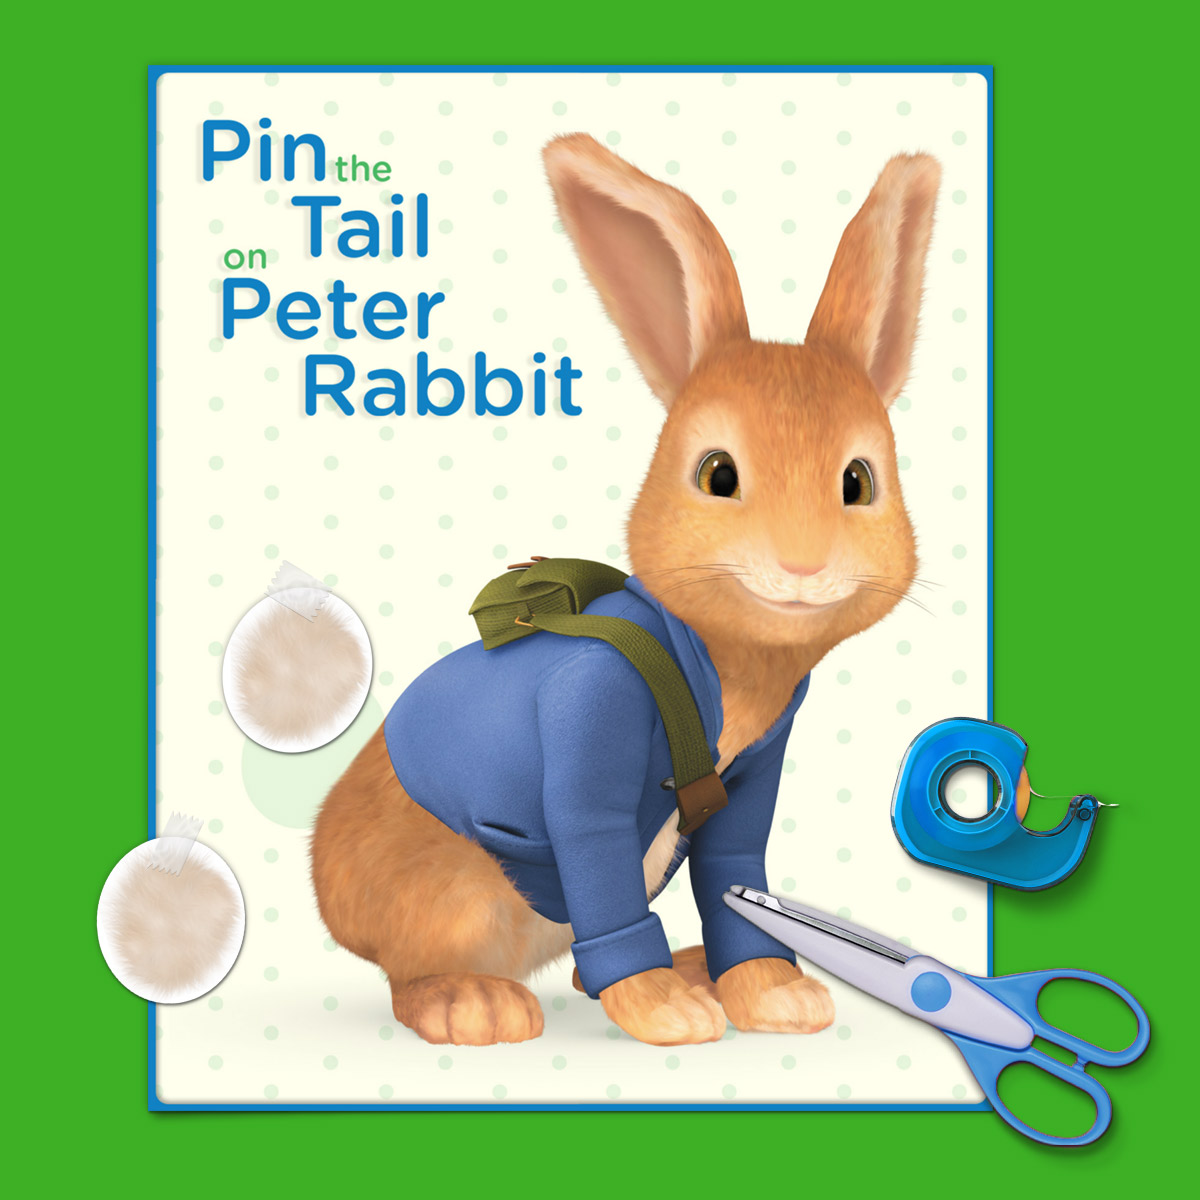 Pin the Tail on Peter Rabbit